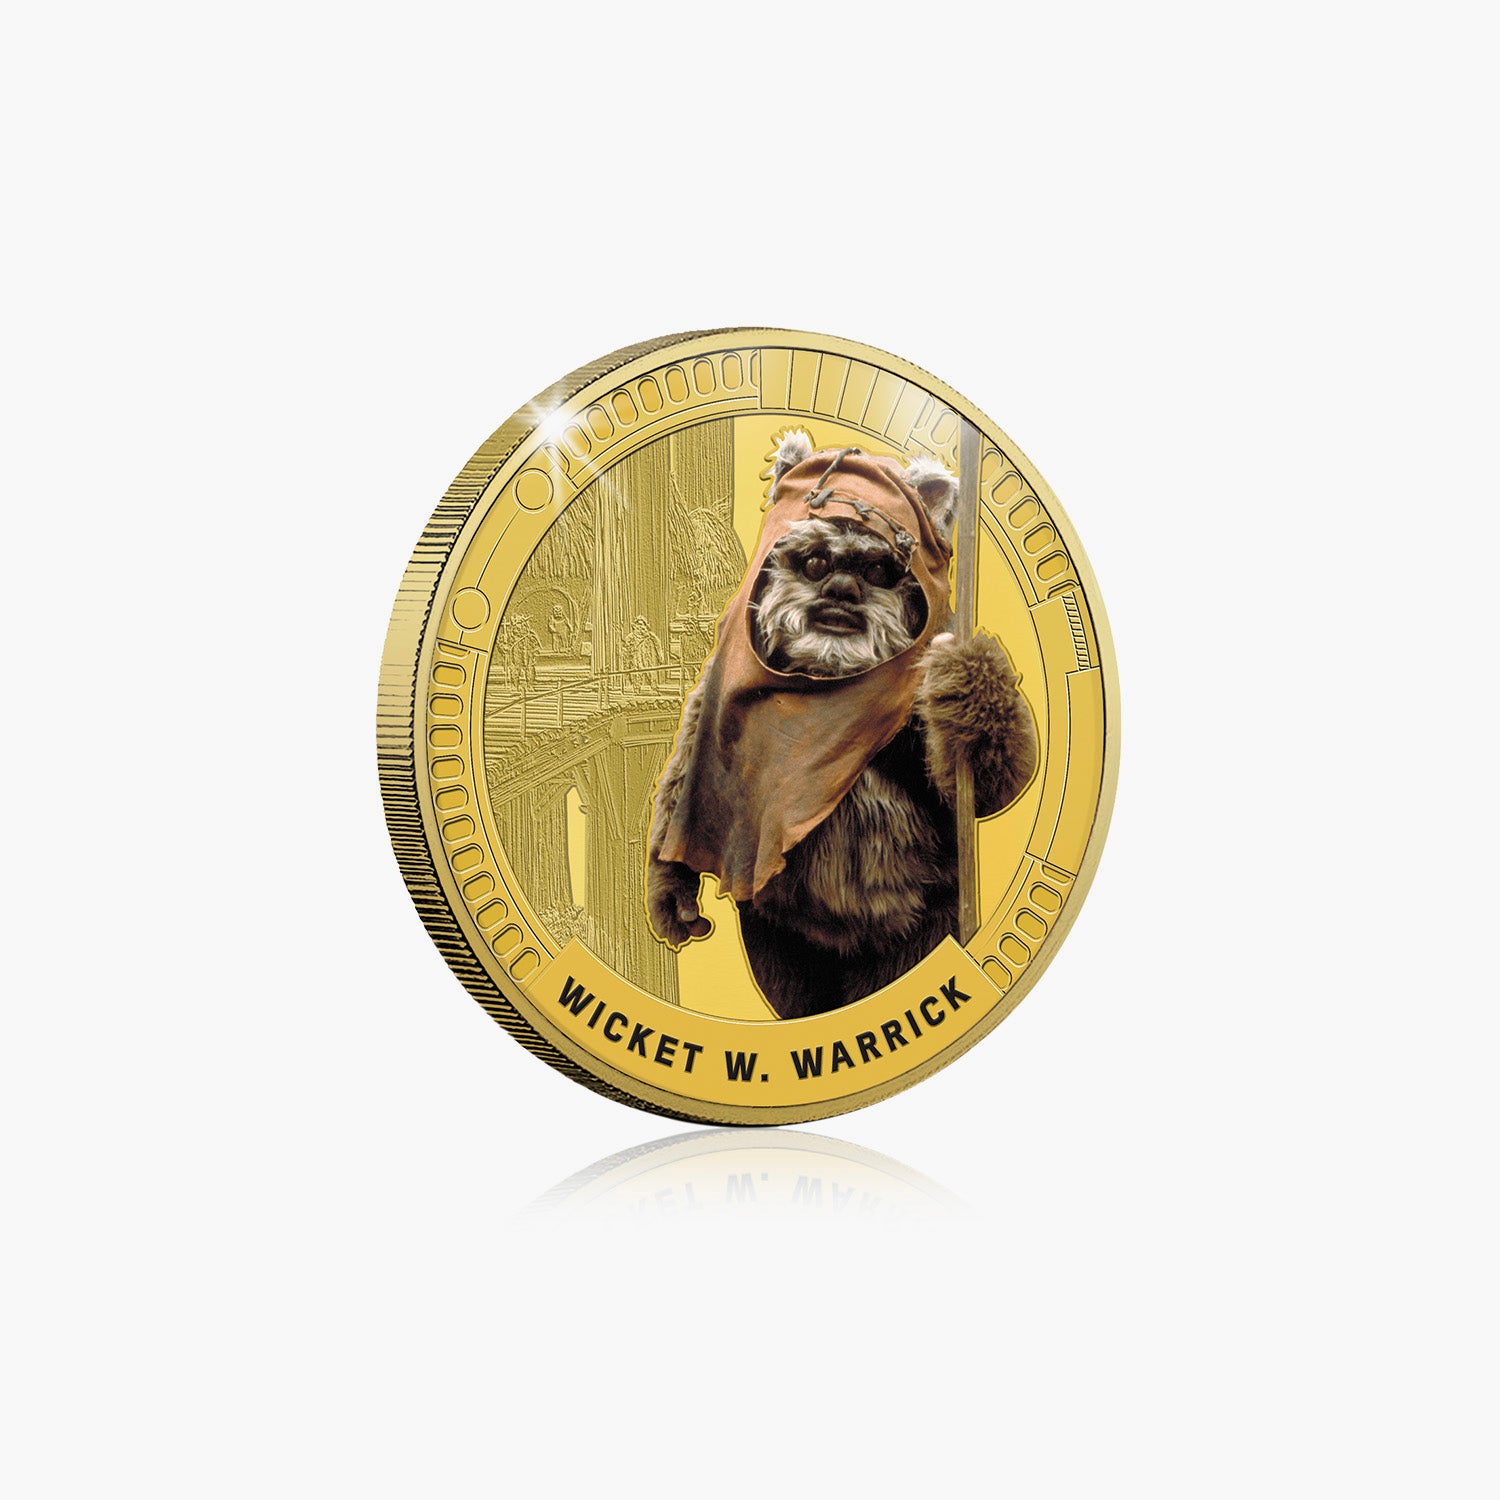 Wicket W. Warrick Gold - Plated Commemorative